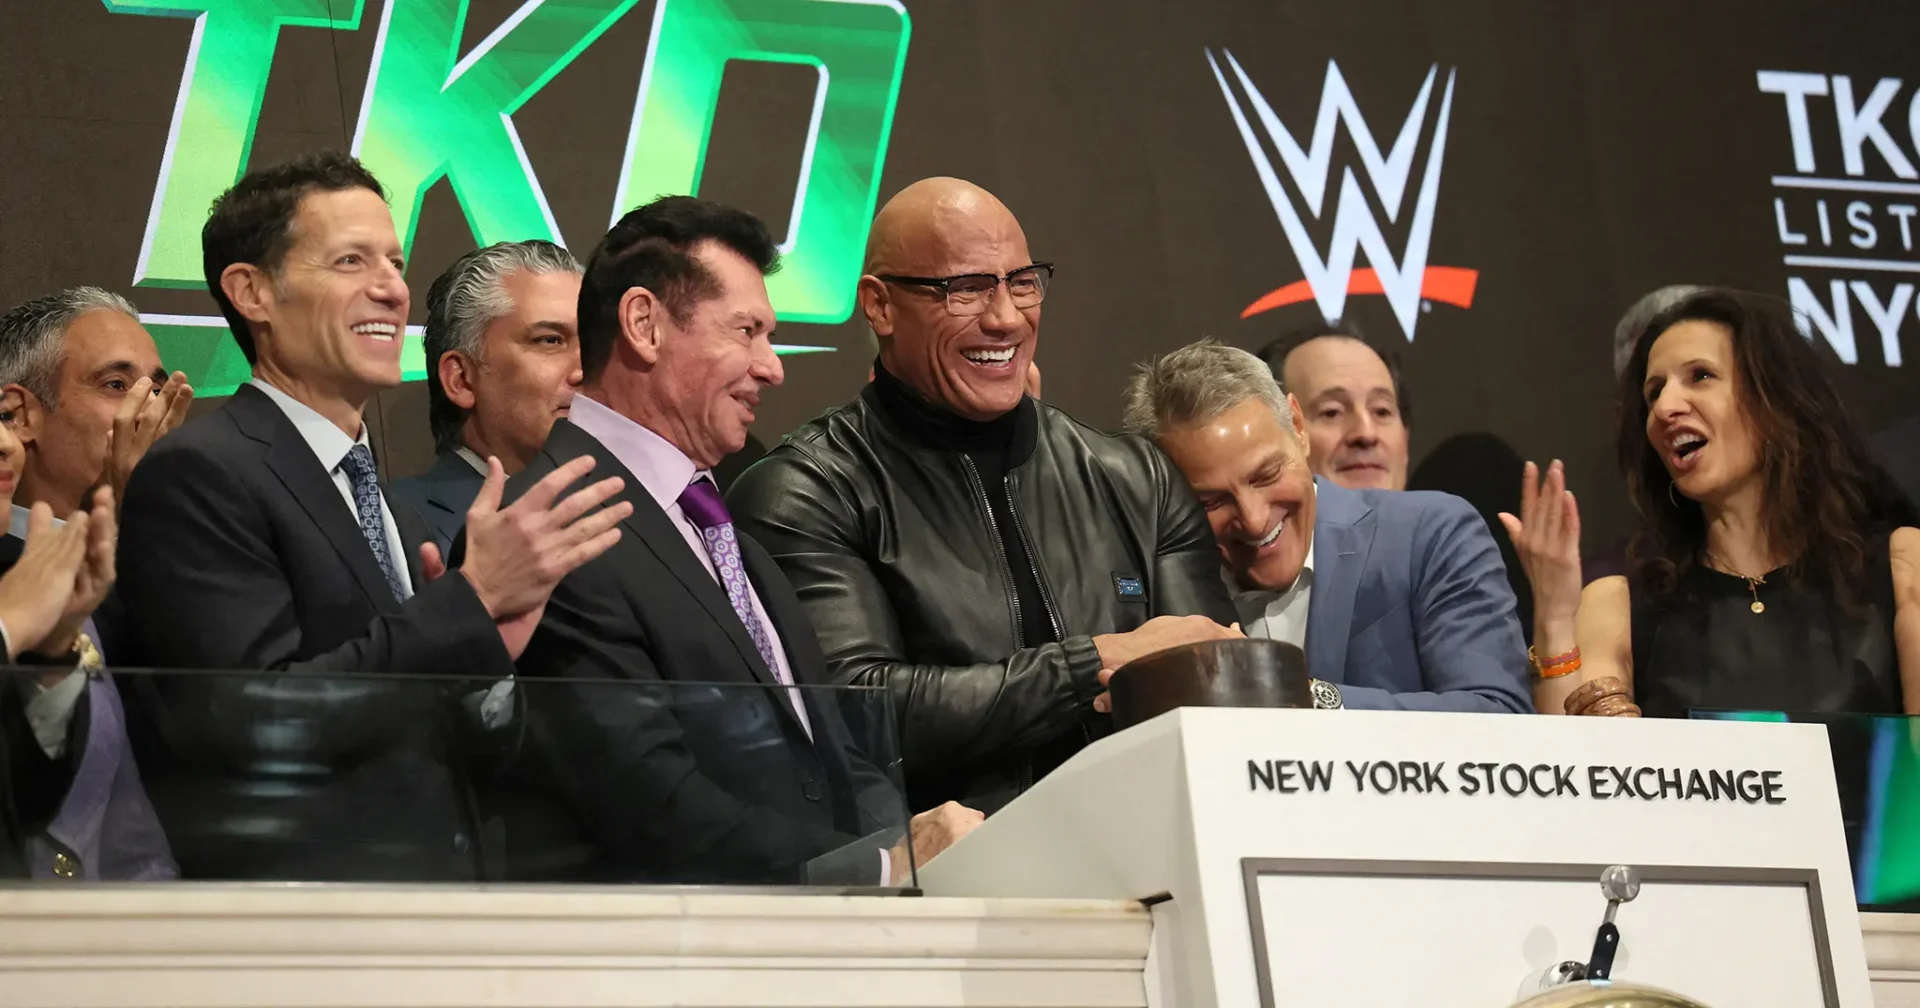 Dwayne Johnson Excludes Vince McMahon From TKO Announcement